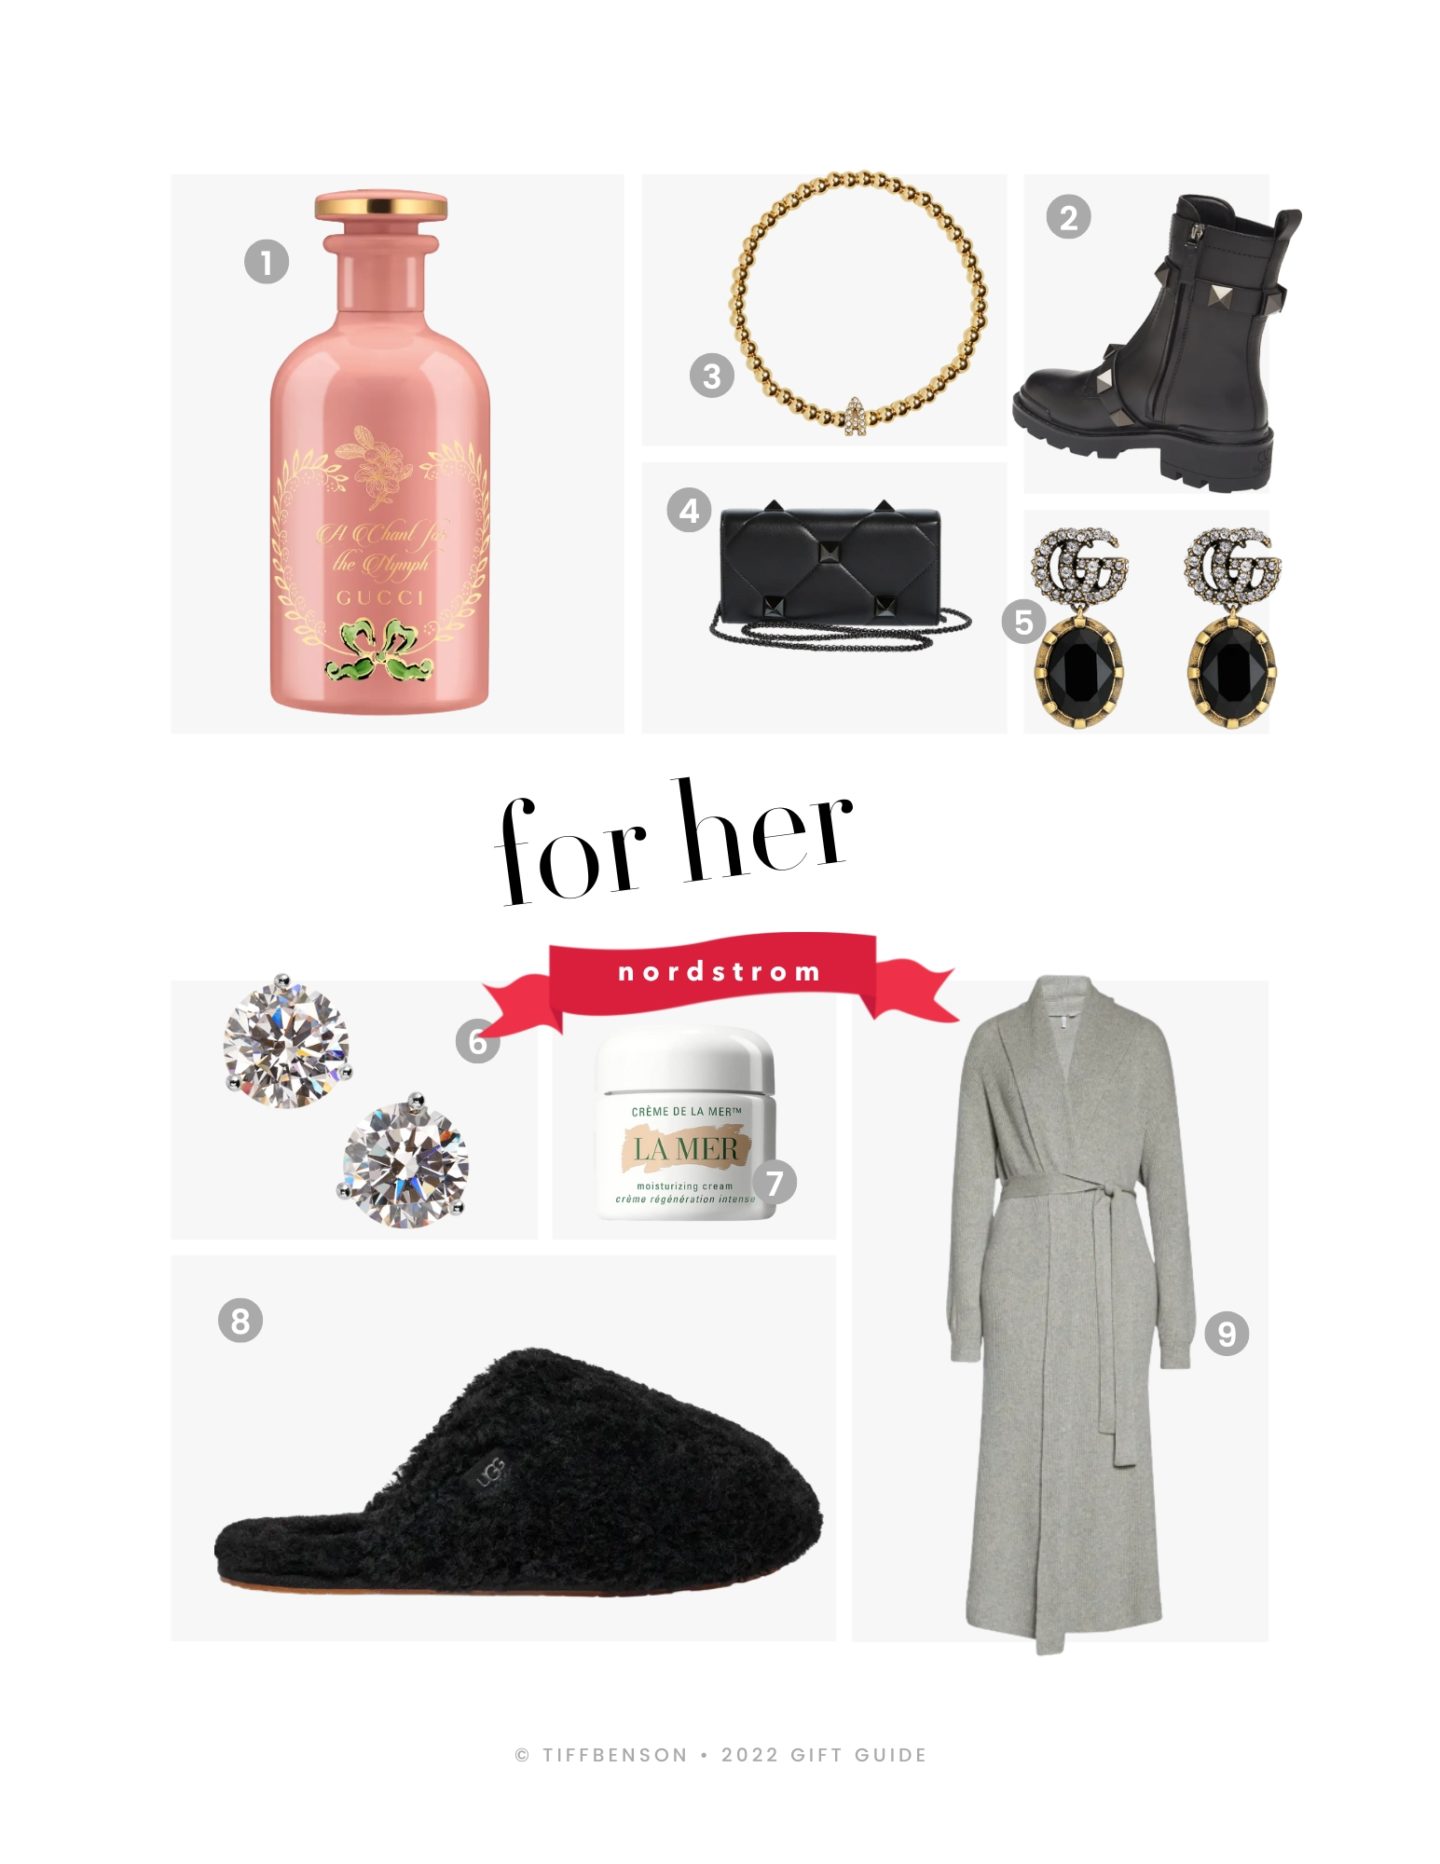 Gifts for her at Nordstrom